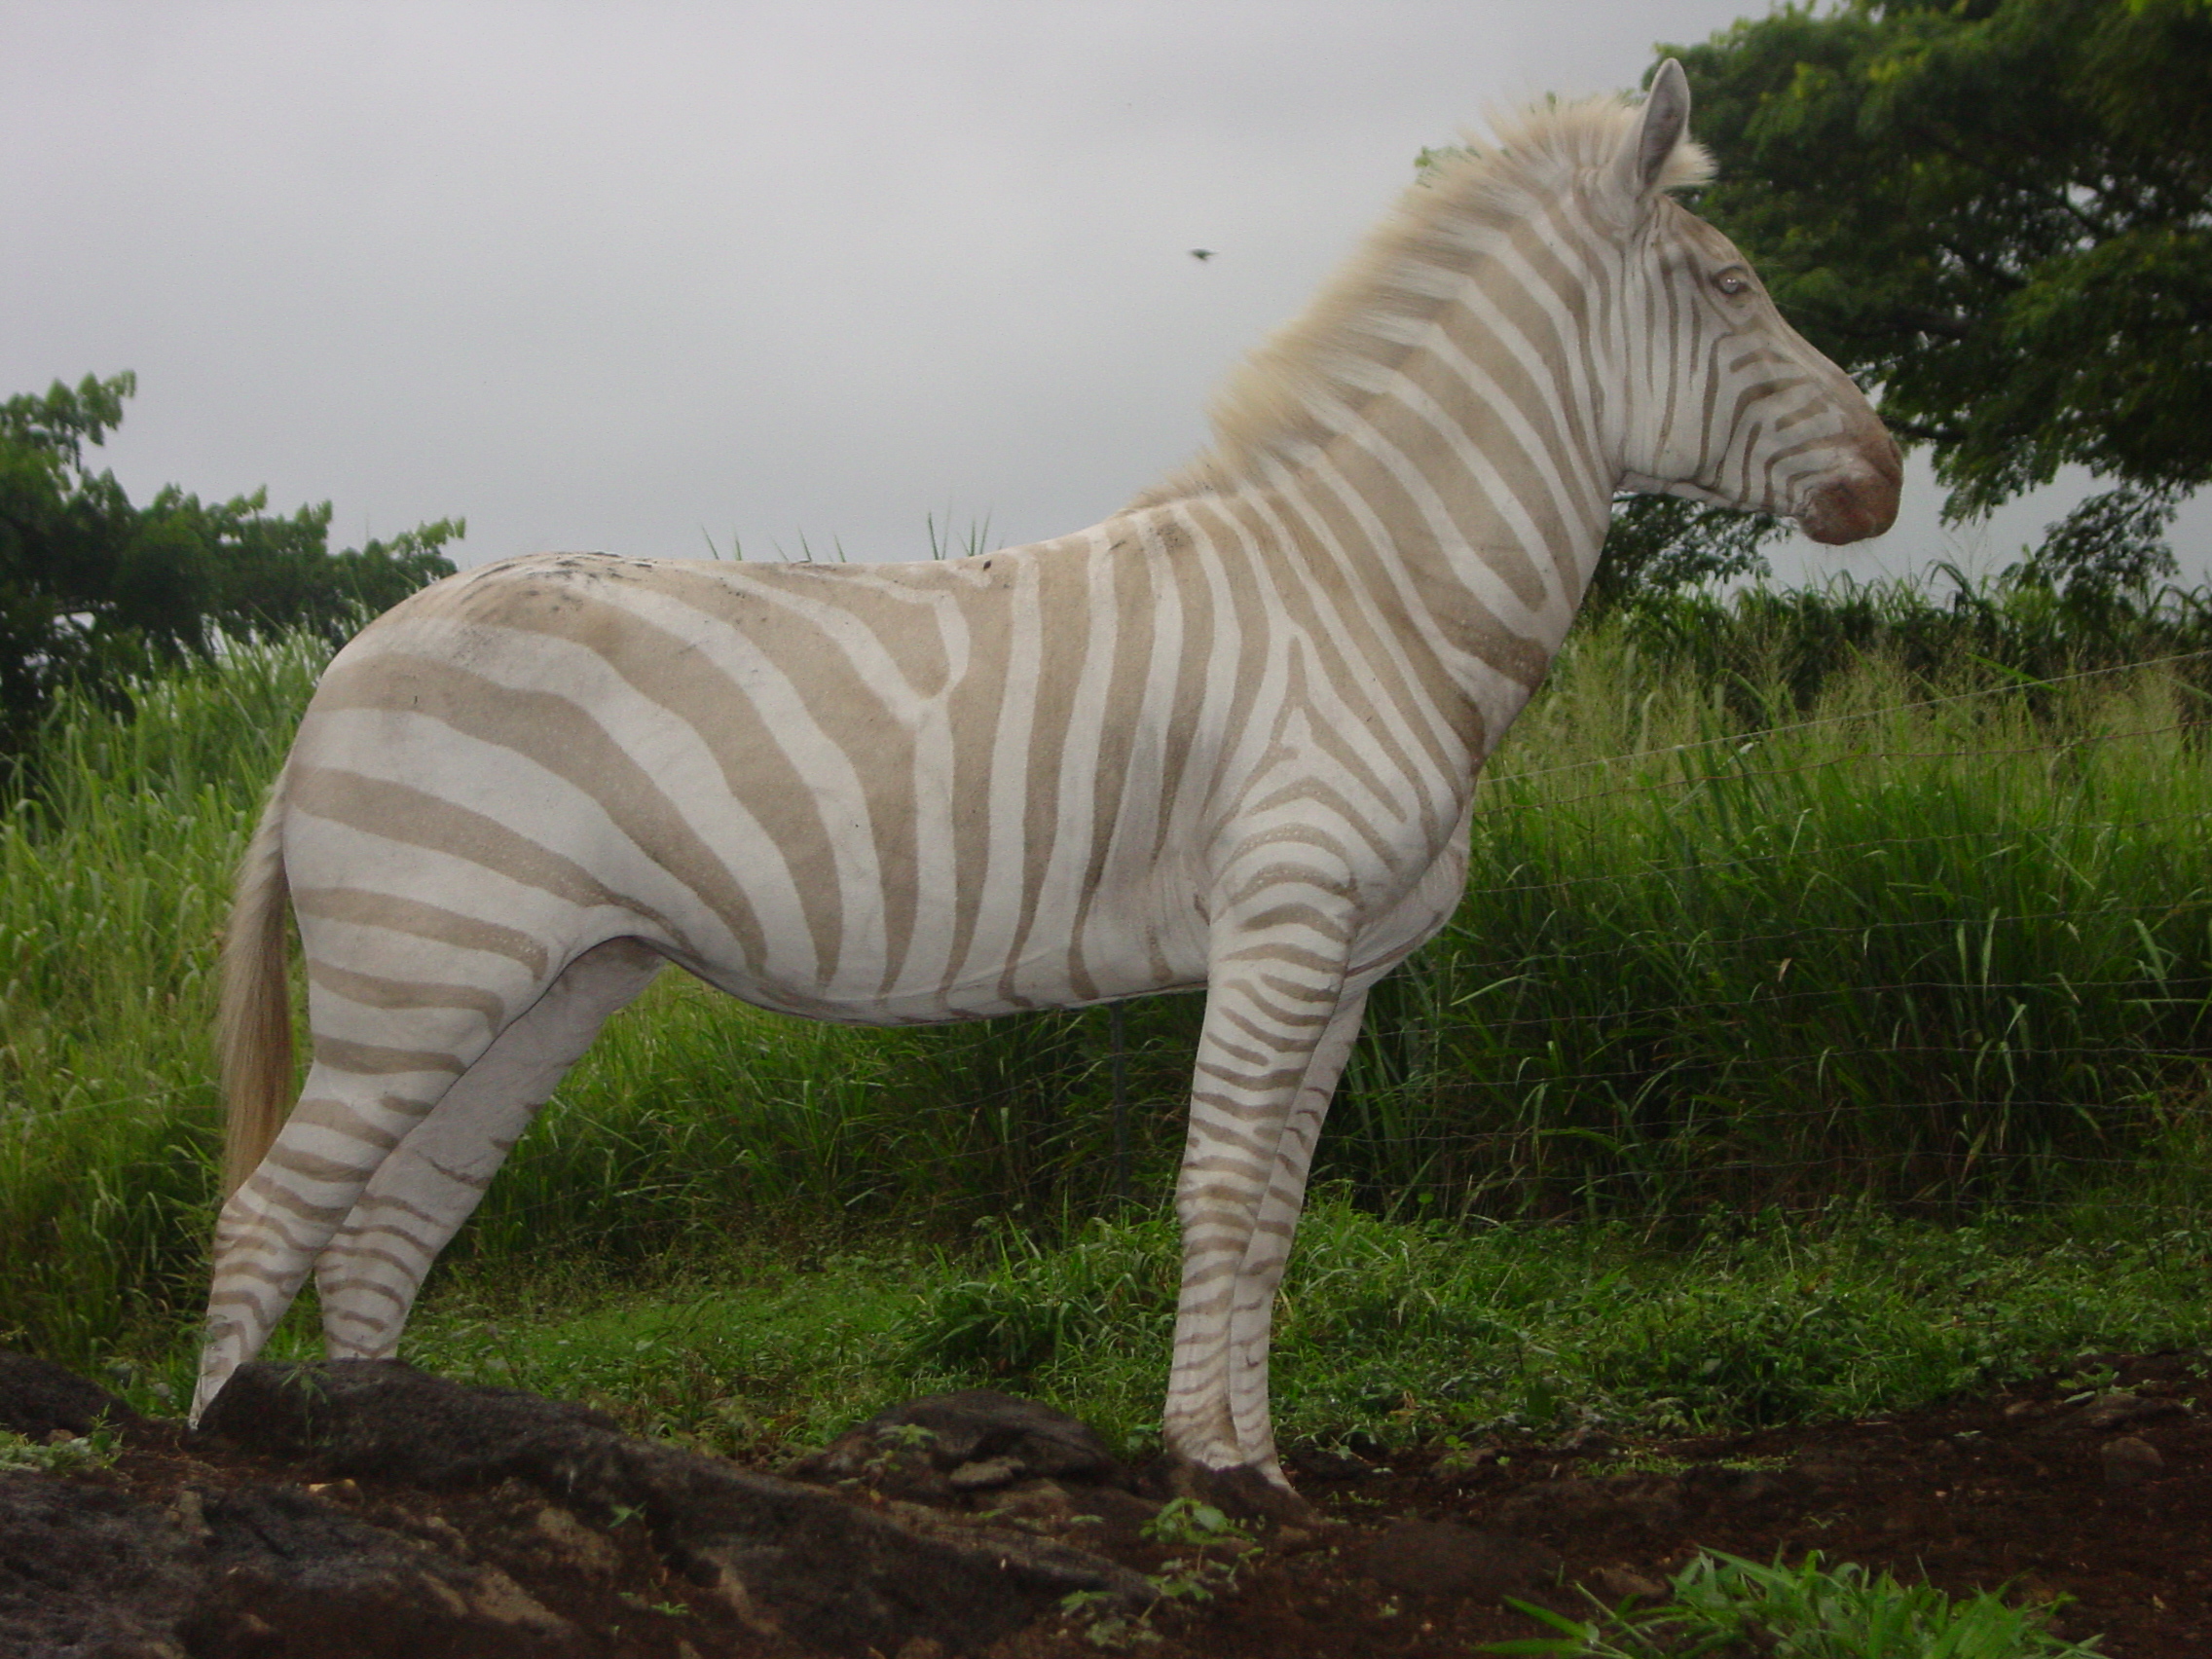 Download Rare Tan And White Striped Zebra Dies At Hawaiian Ranch Live Science